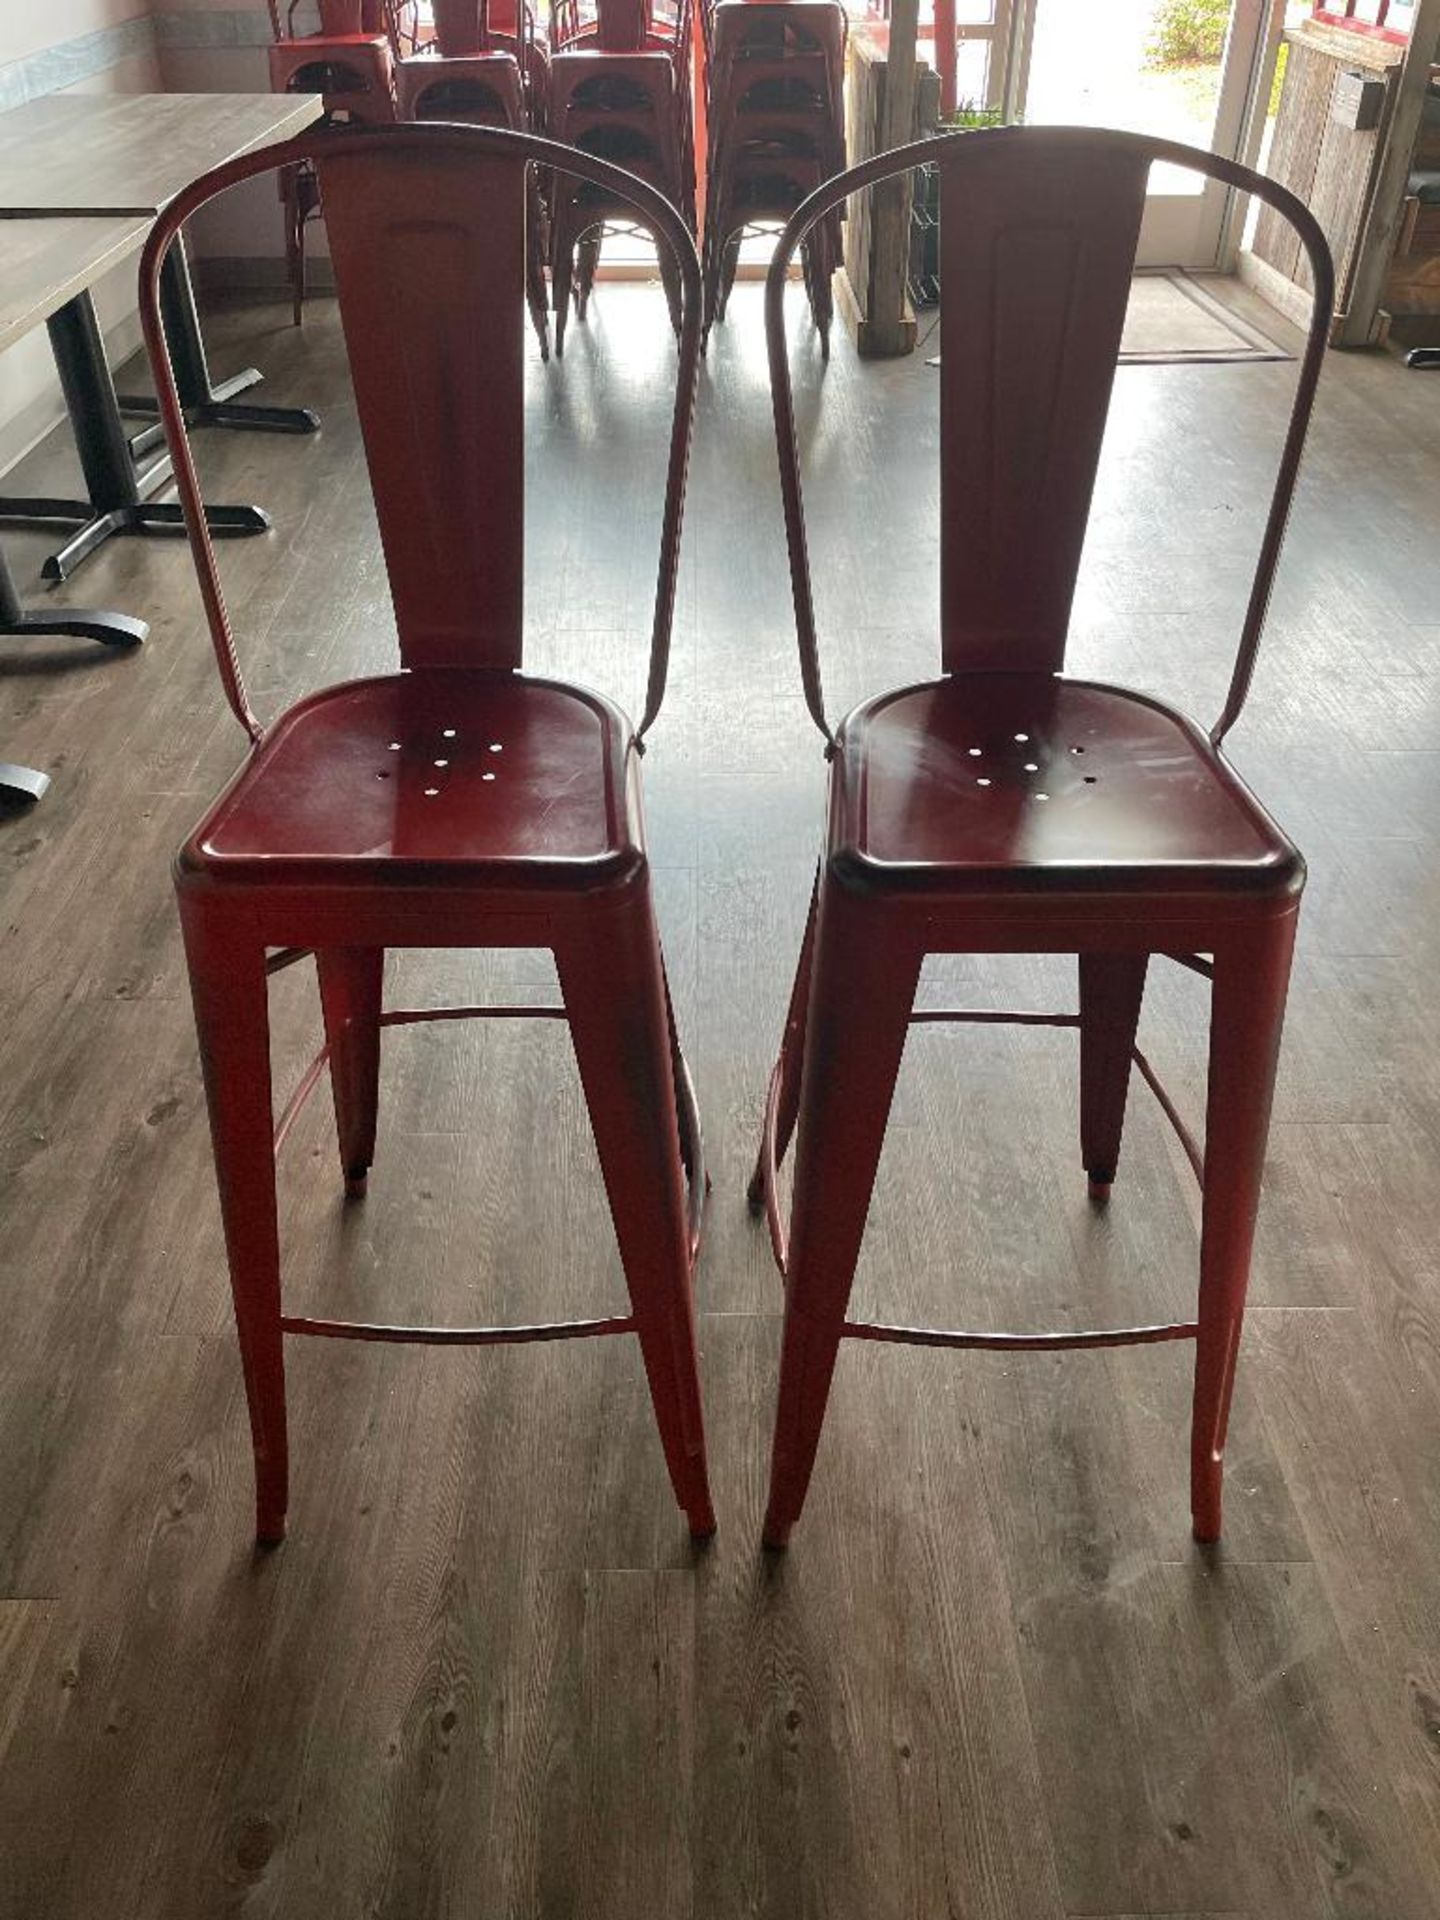 DESCRIPTION: (2) 30" METAL BAR STOOLS ADDITIONAL INFORMATION FADED TABASCO LOCATION: SEATING THIS LO - Image 3 of 3